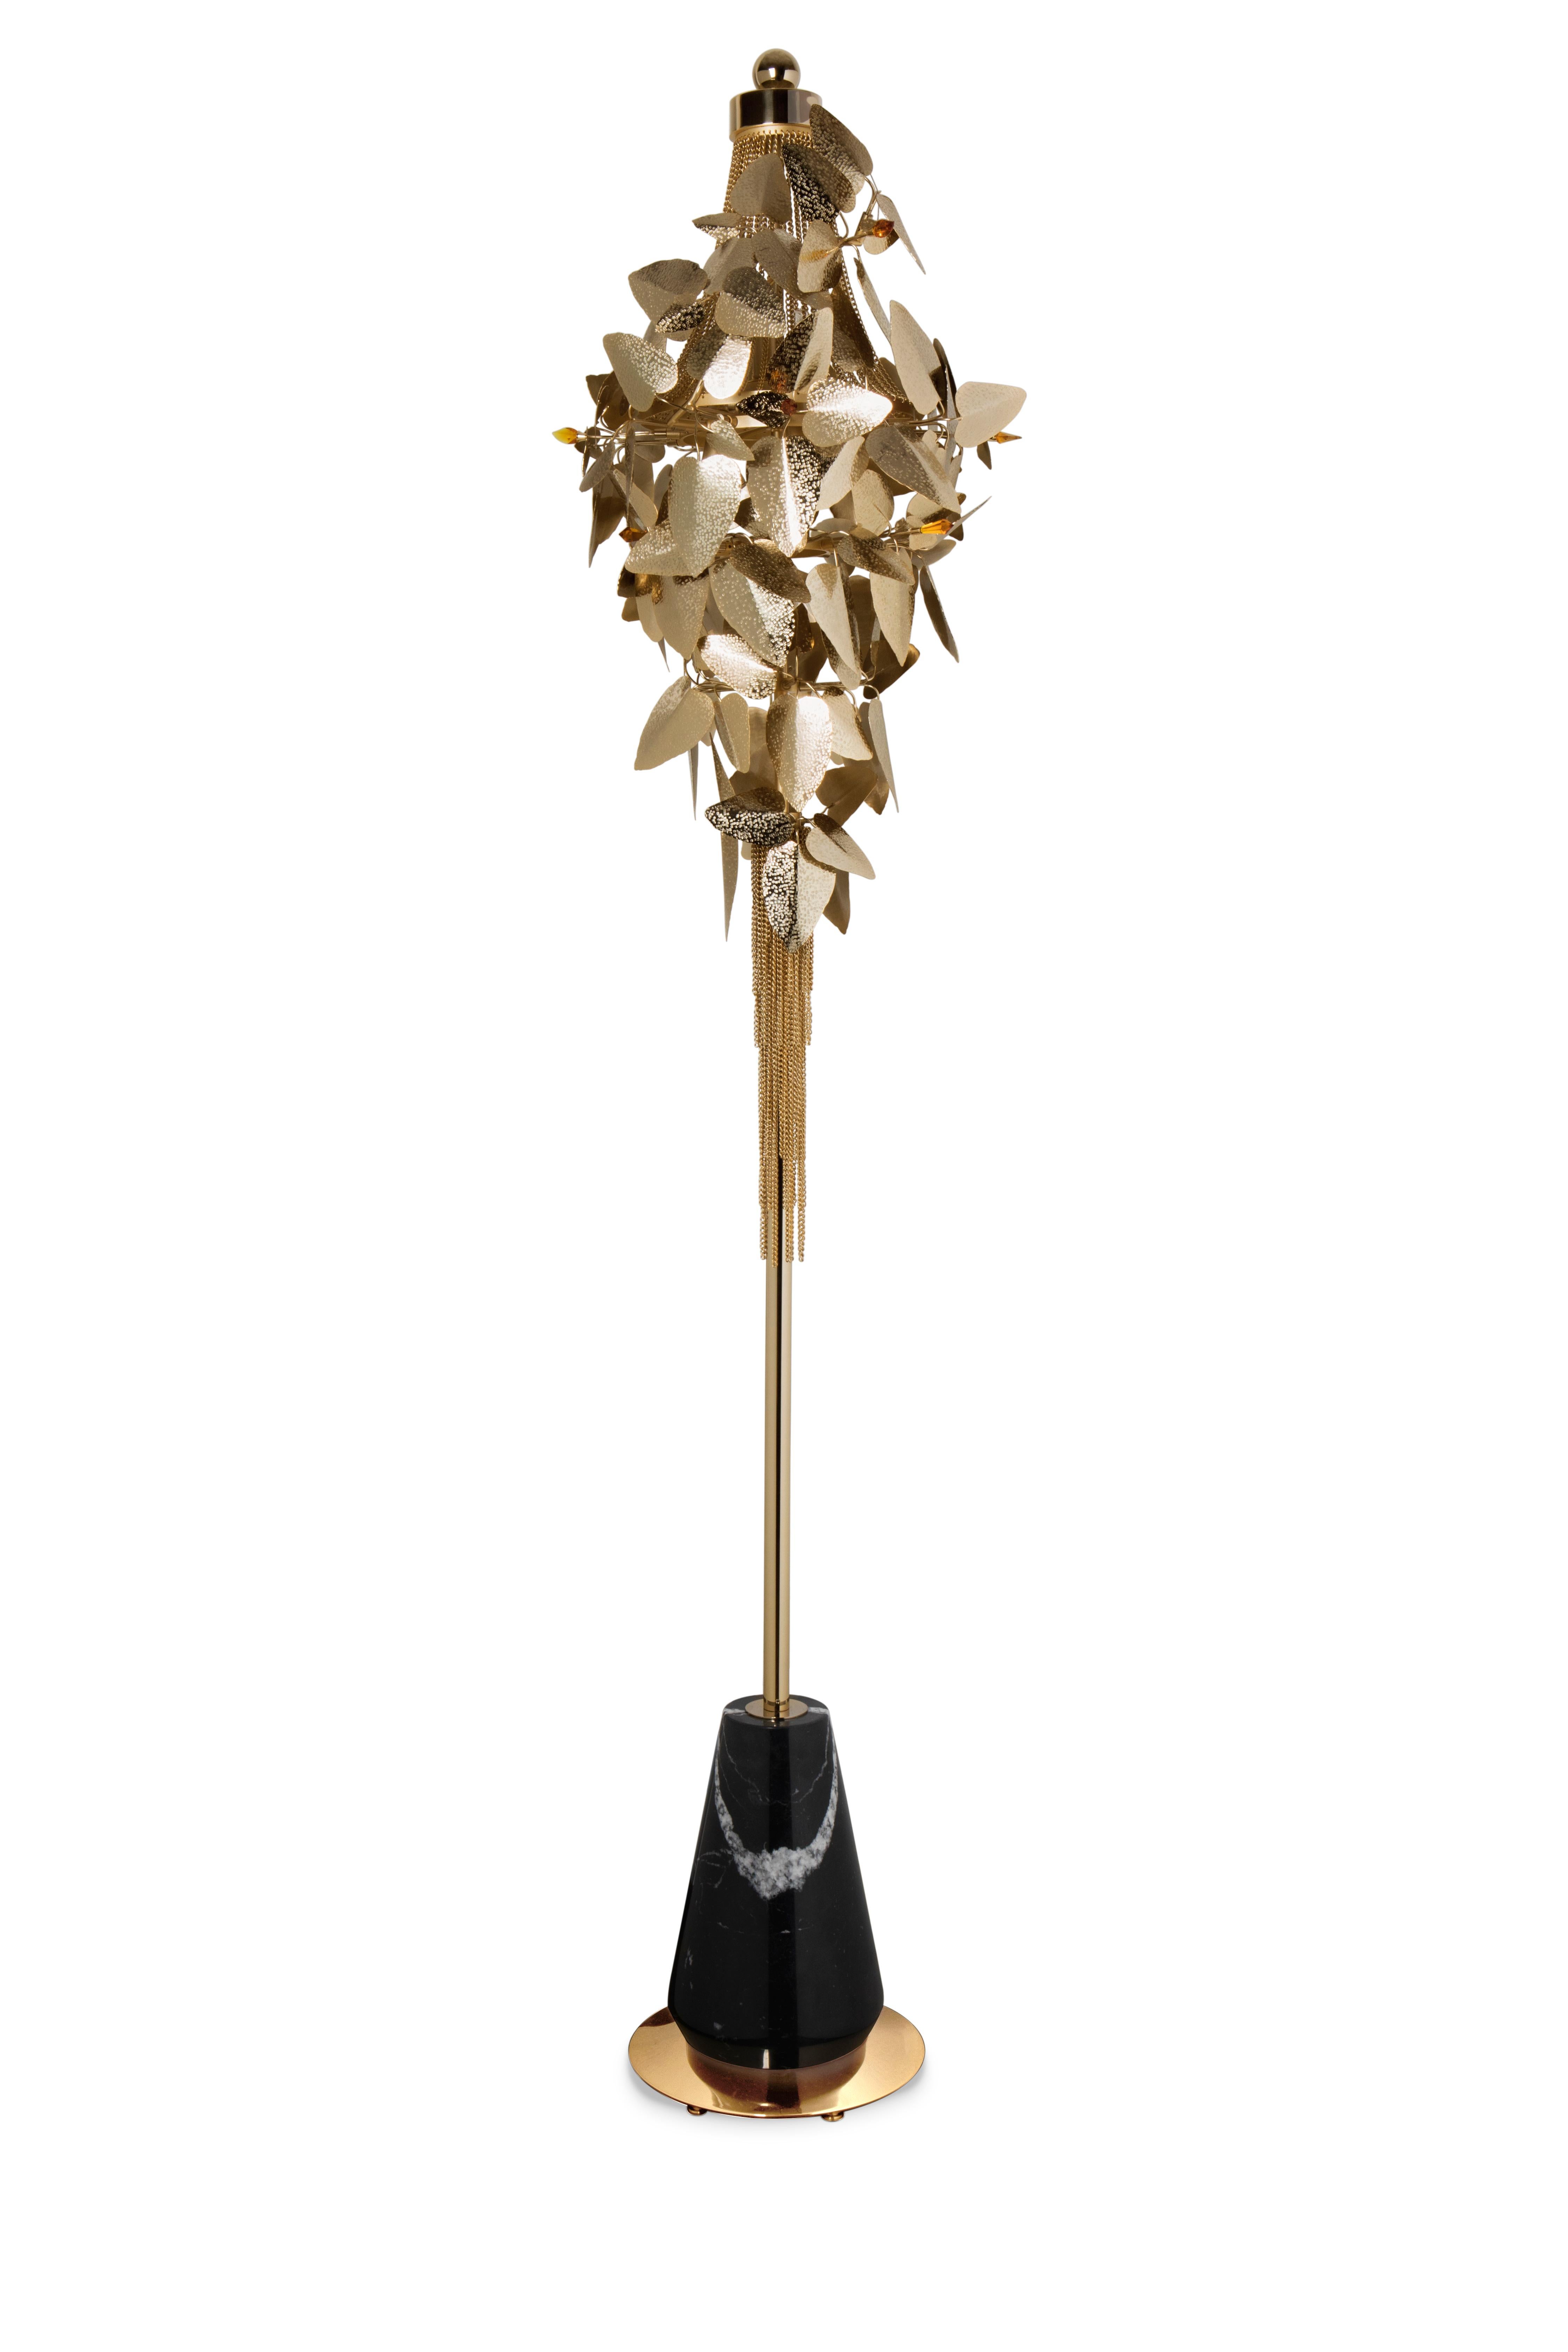 Maintaining the elegant and feminine vibe of the entire family, this McQueen floor lamp will certainly brighten everything around it. The perfect and complex combination of gold plated hammered leaves with amber Swarovski crystals encompasses a